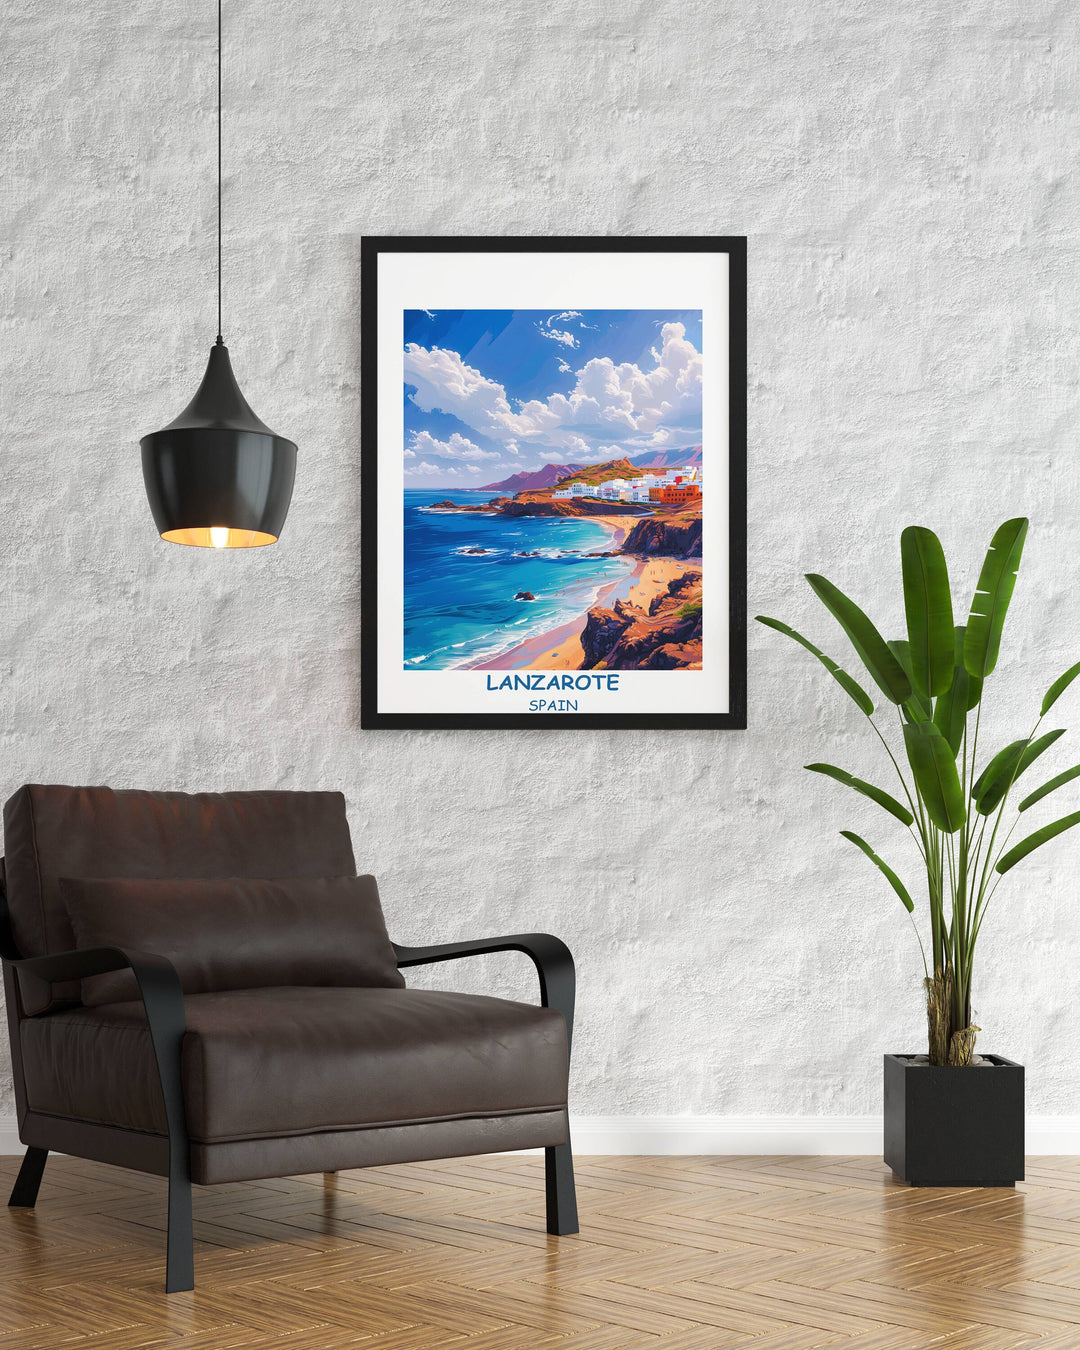 Lanzarote Travel Print Inspiring artwork celebrating allure of Canary Islands. Perfect for Spain adventurers.